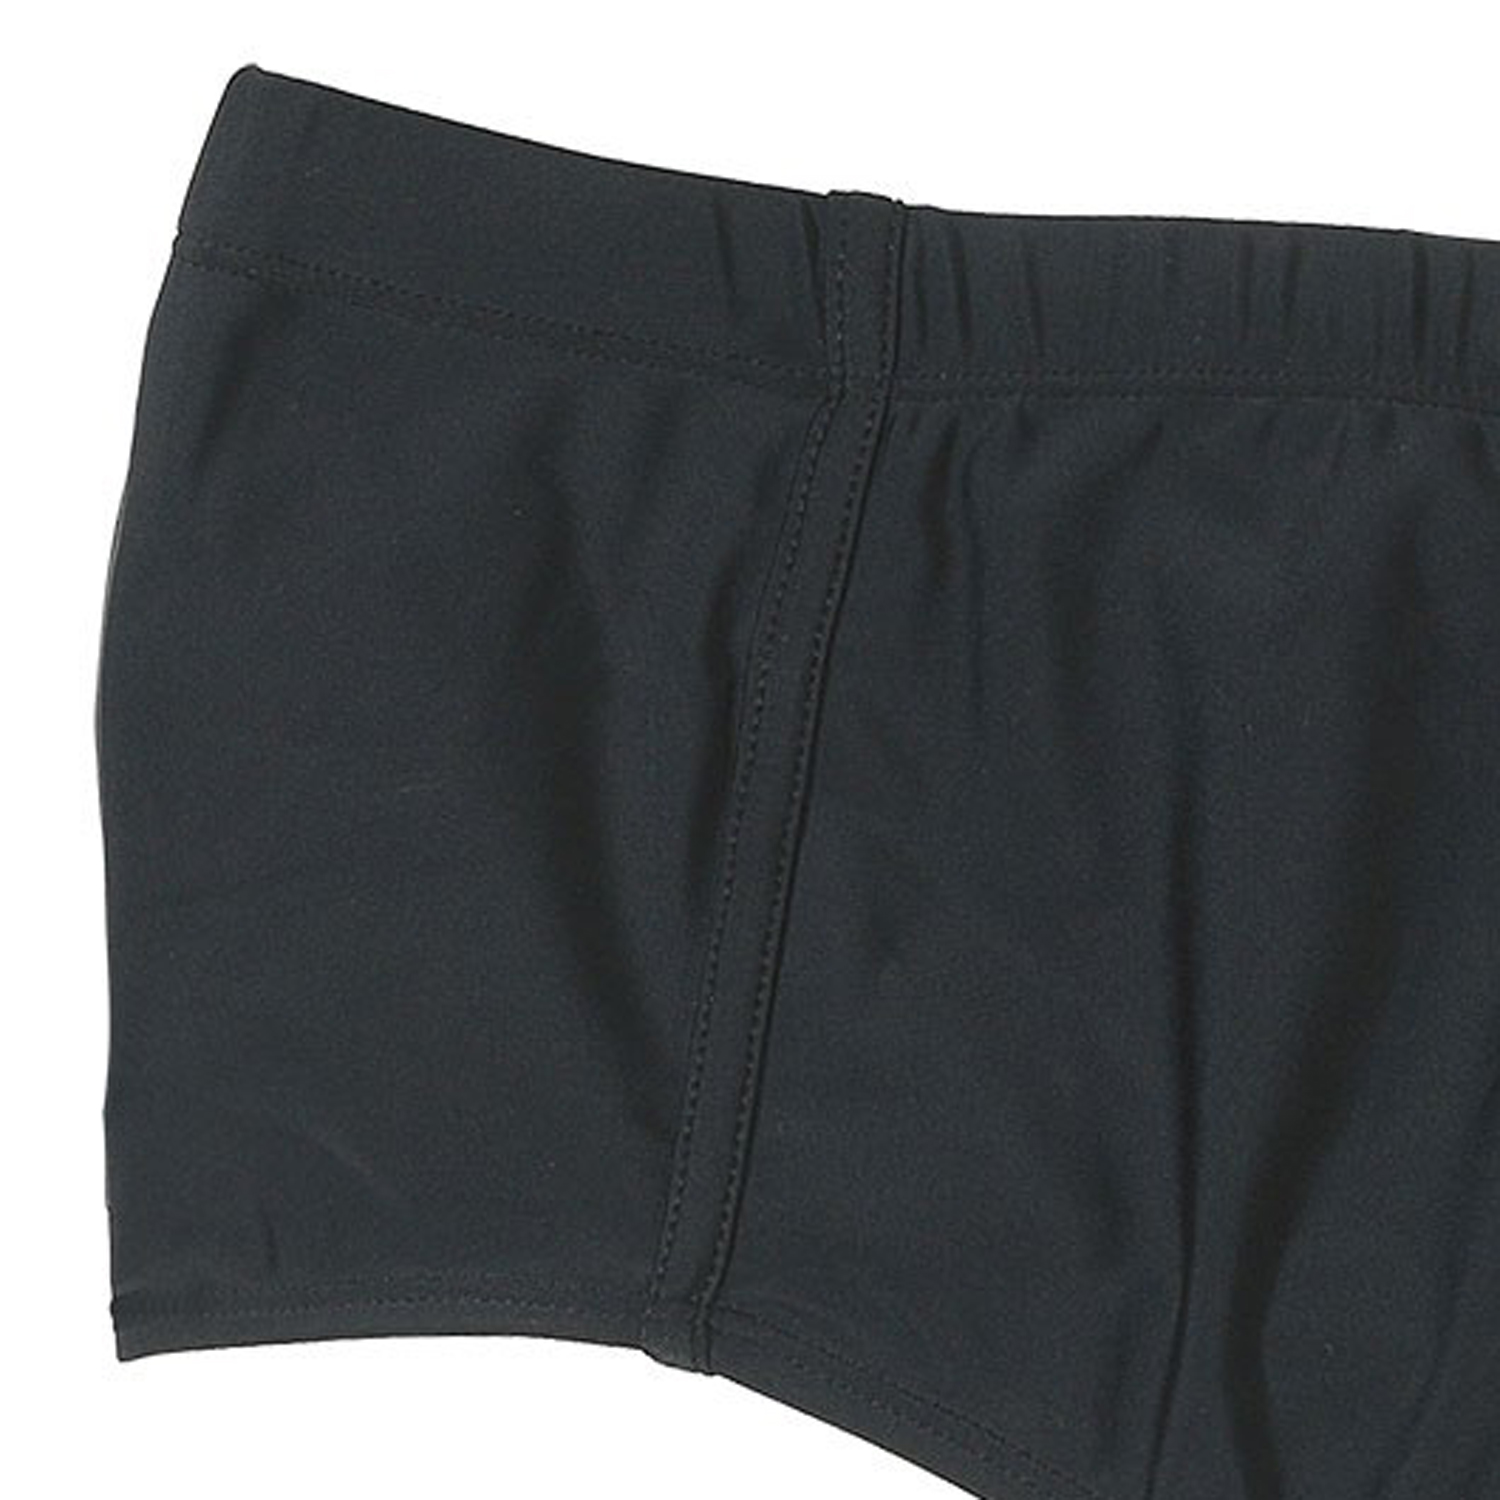 Swimming trunks in black by Abraxas in big sizes up to 8XL